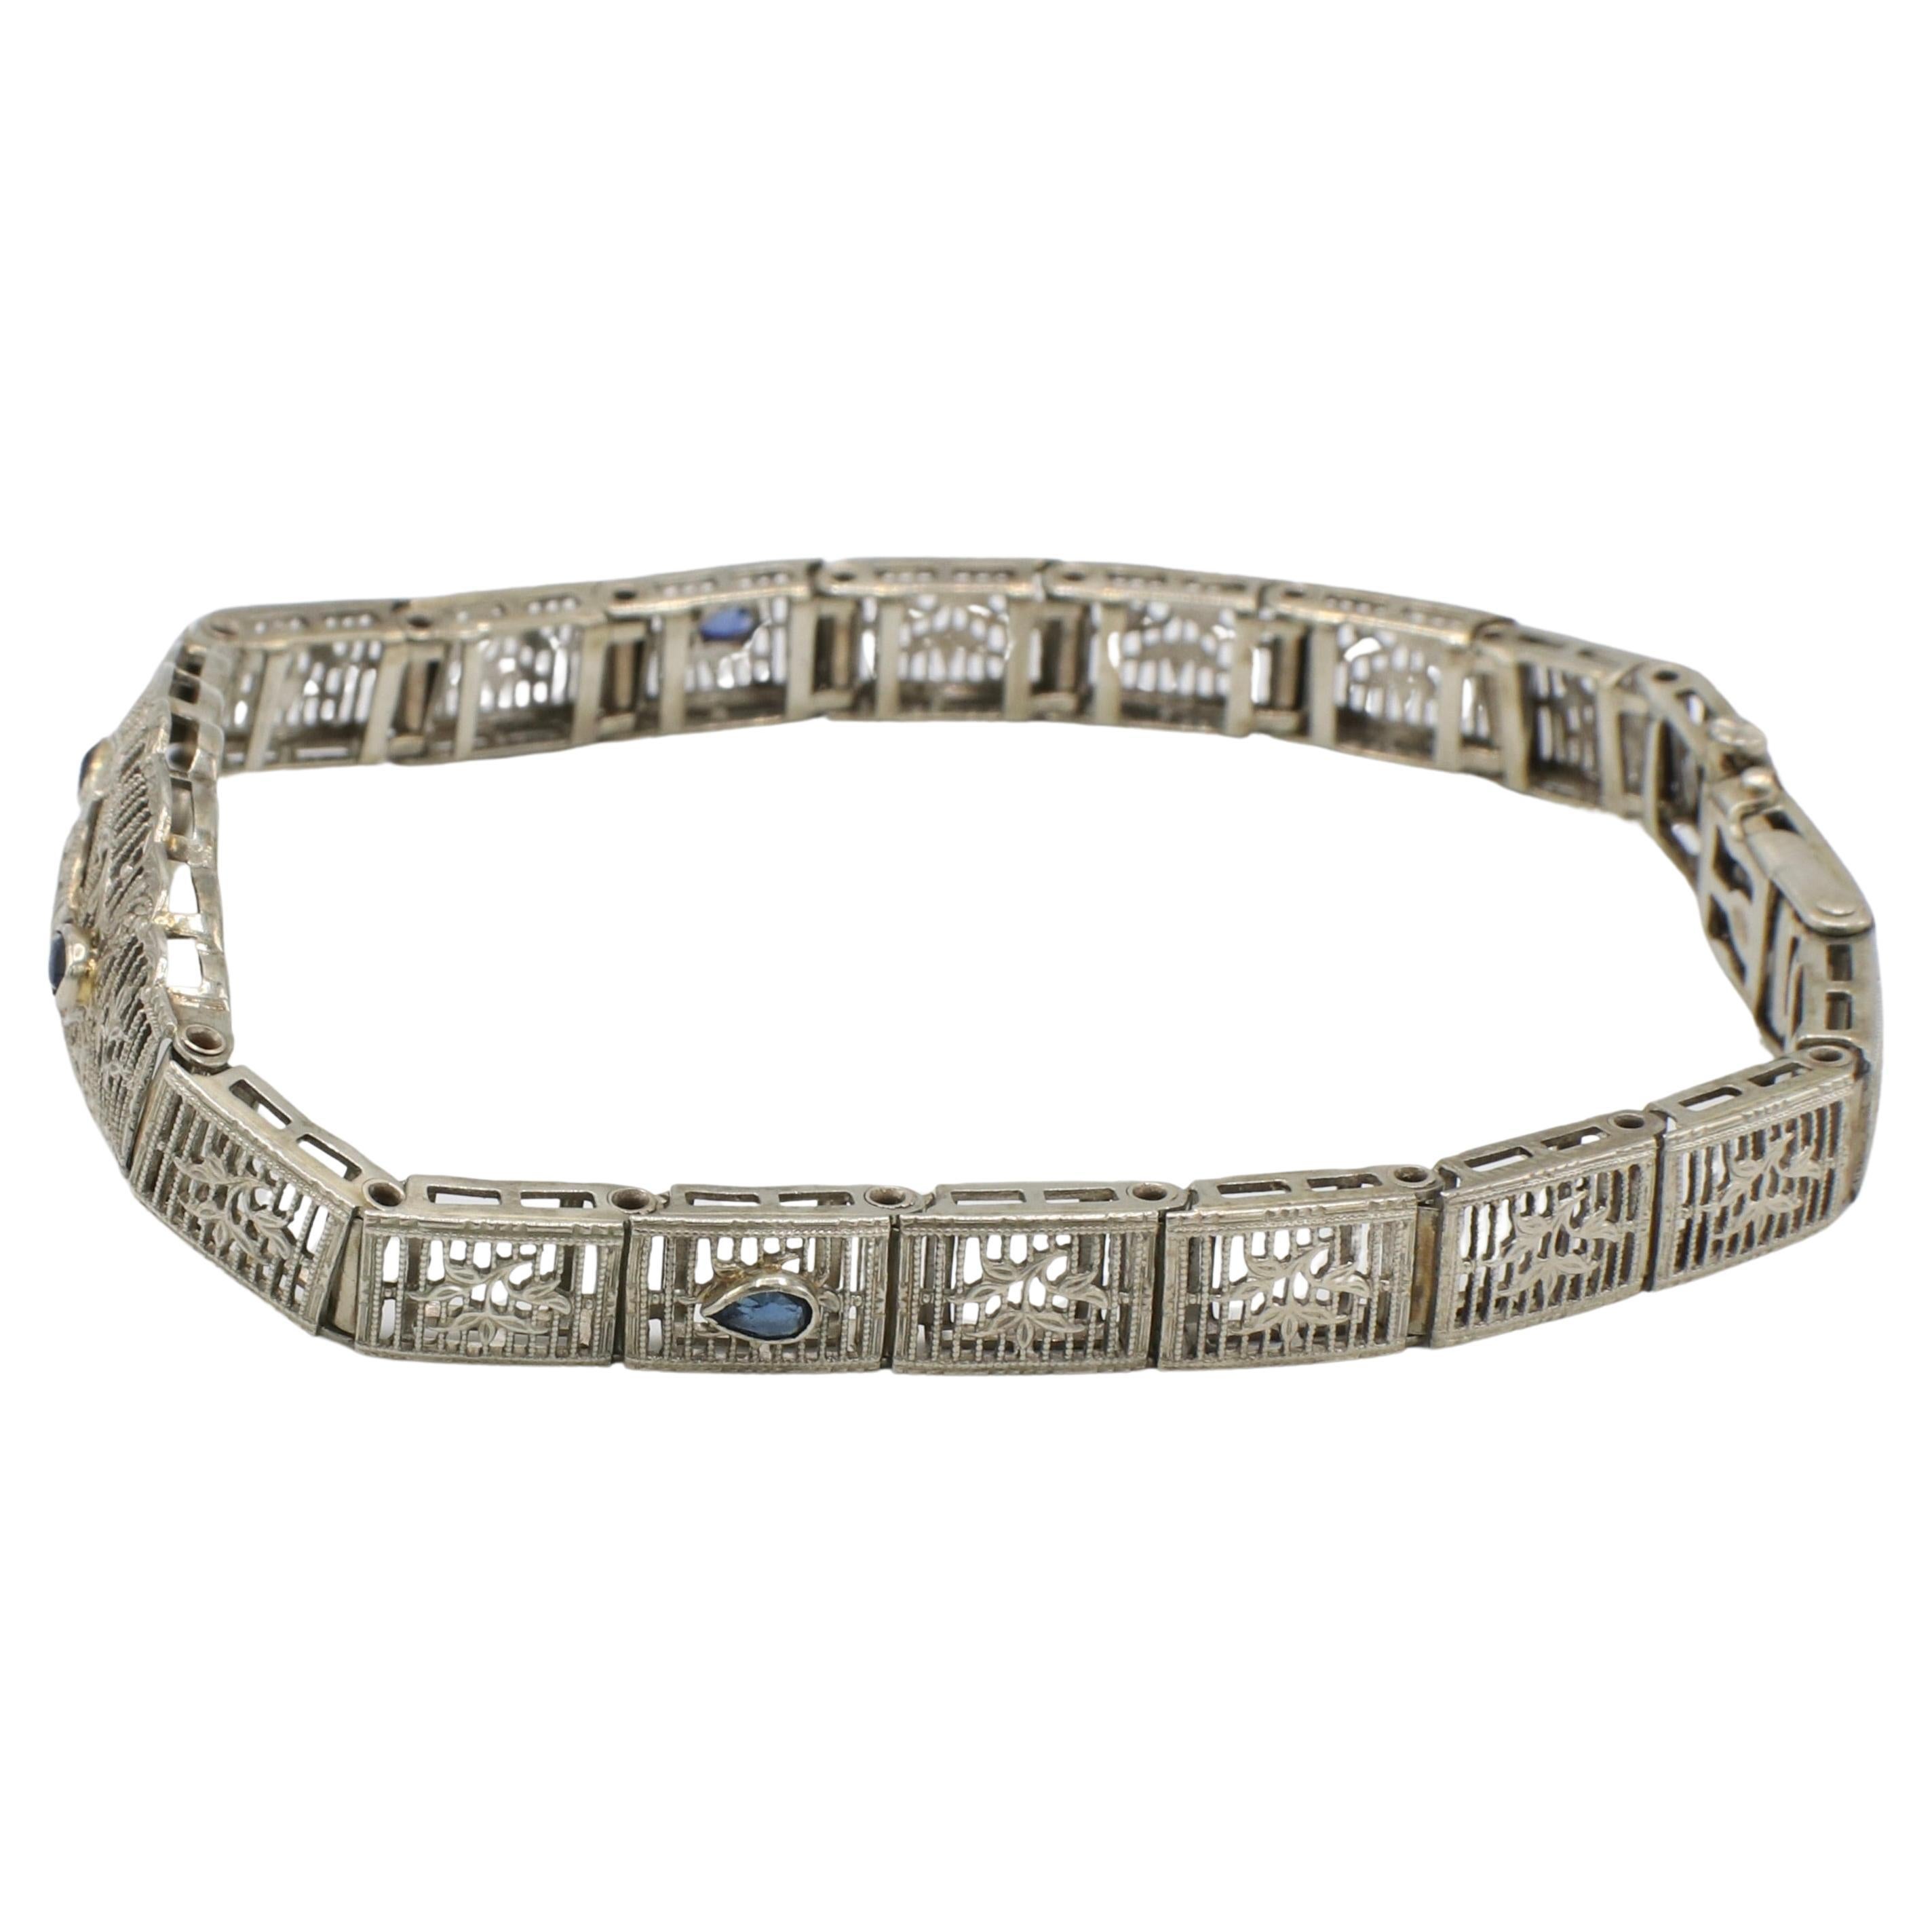 Art Deco White Gold Filigree Natural Diamond & Sapphire Belly Bracelet 
Metal: 10K white gold
Weight: 9.2 grams
Length: 7 inches
Width:6-13mm
Diamonds: 1 round single cut natural diamond, approx. 0,1 CT G-H VS
Sapphires: Period reproduction